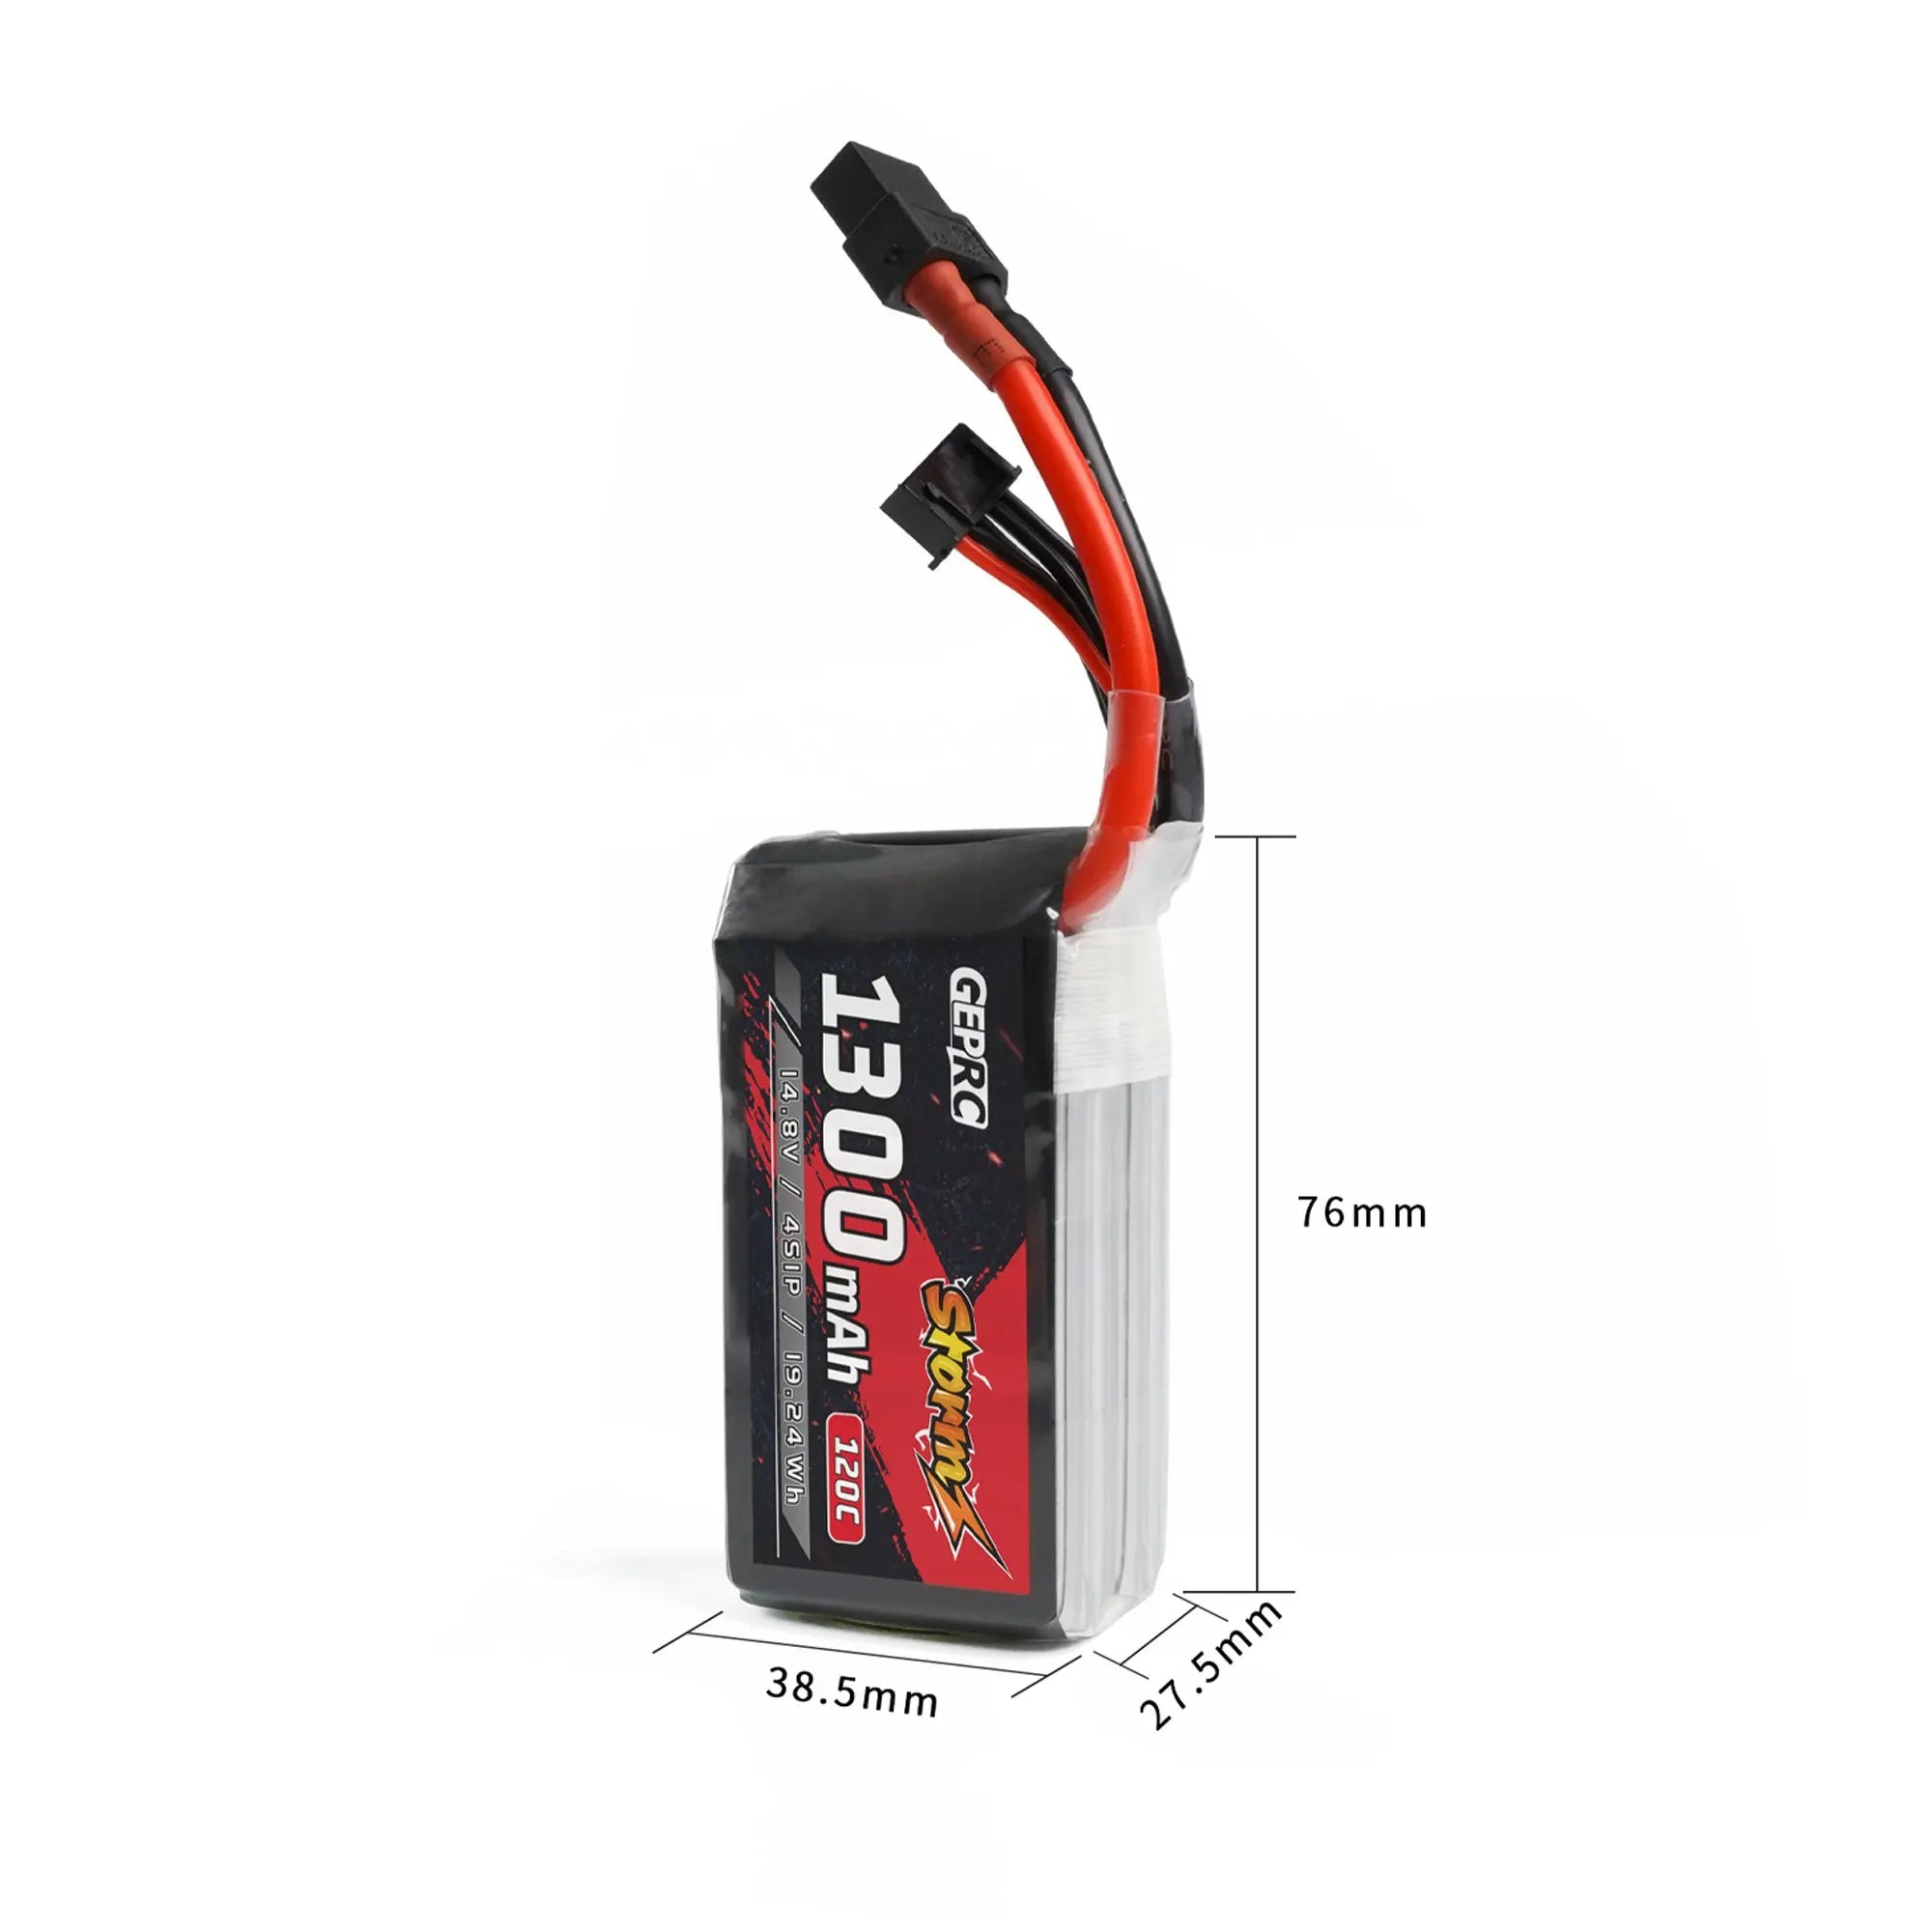 GEPRC Storm 4S 1300mAh 120C Lipo Battery, Q: What kind of charger is used to charge the battery